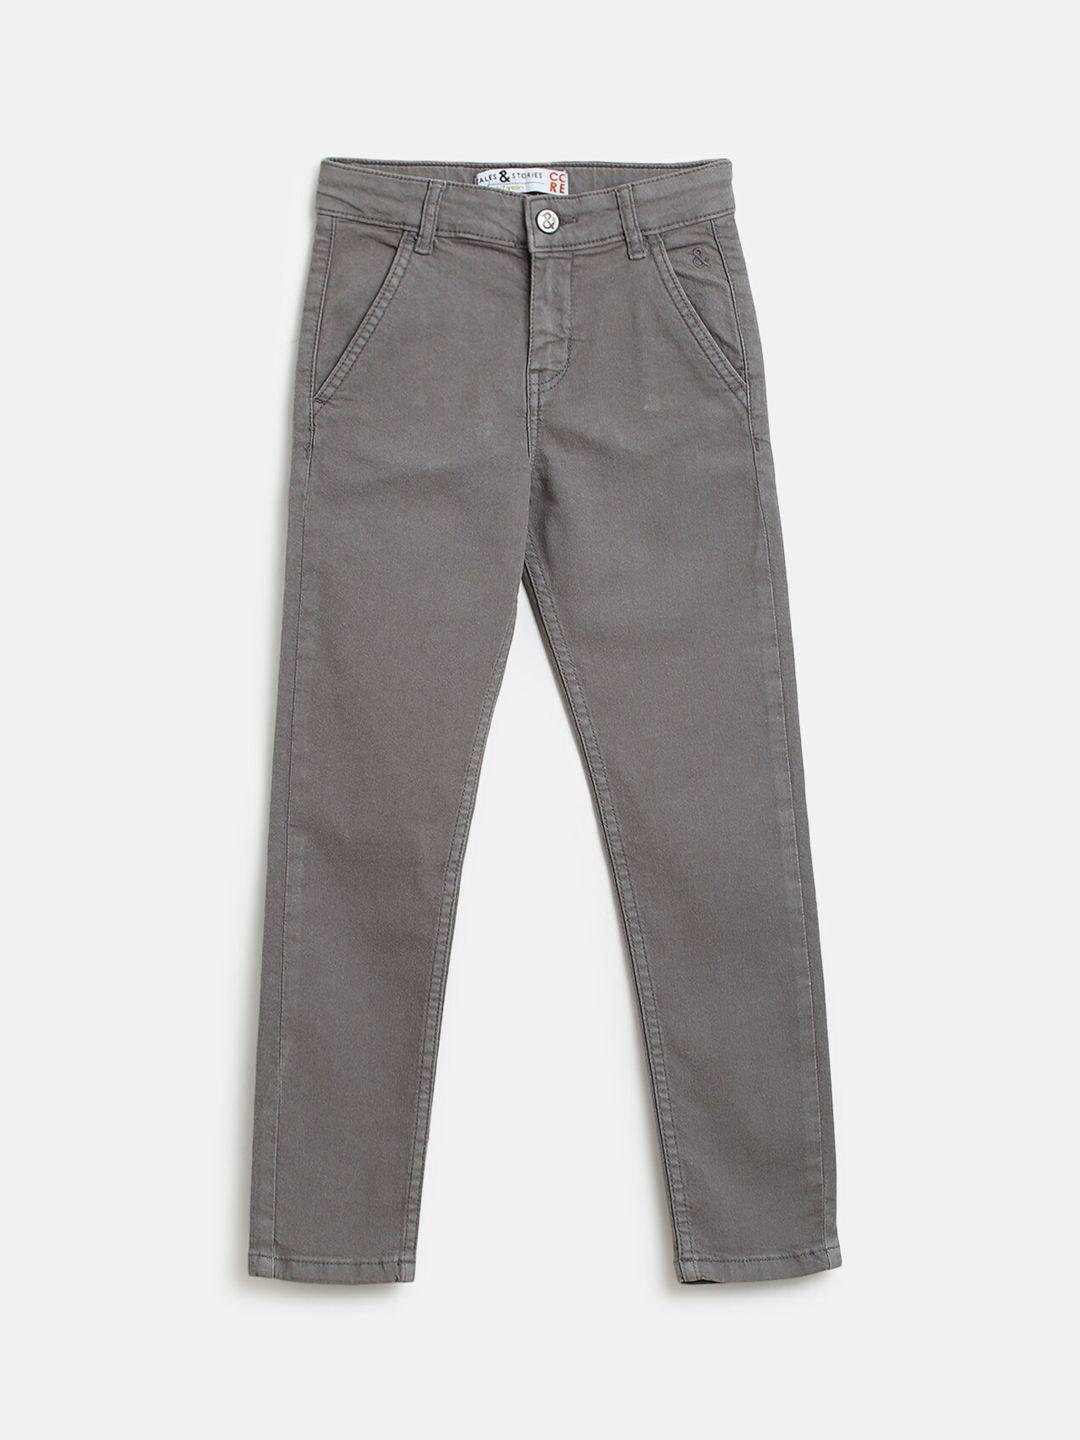 tales & stories boys grey slim fit cotton trousers